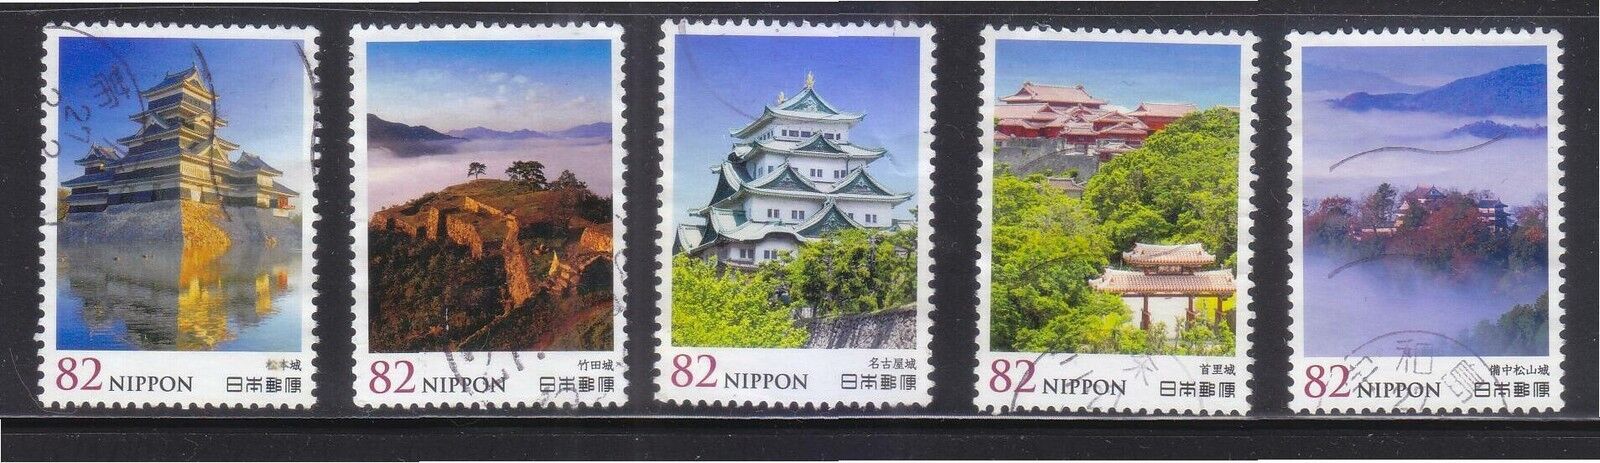 JAPAN 2014 JAPANESE CASTLE SERIES All items free shipping 3 famous COMP. STAMPS OF SET FIN IN 5